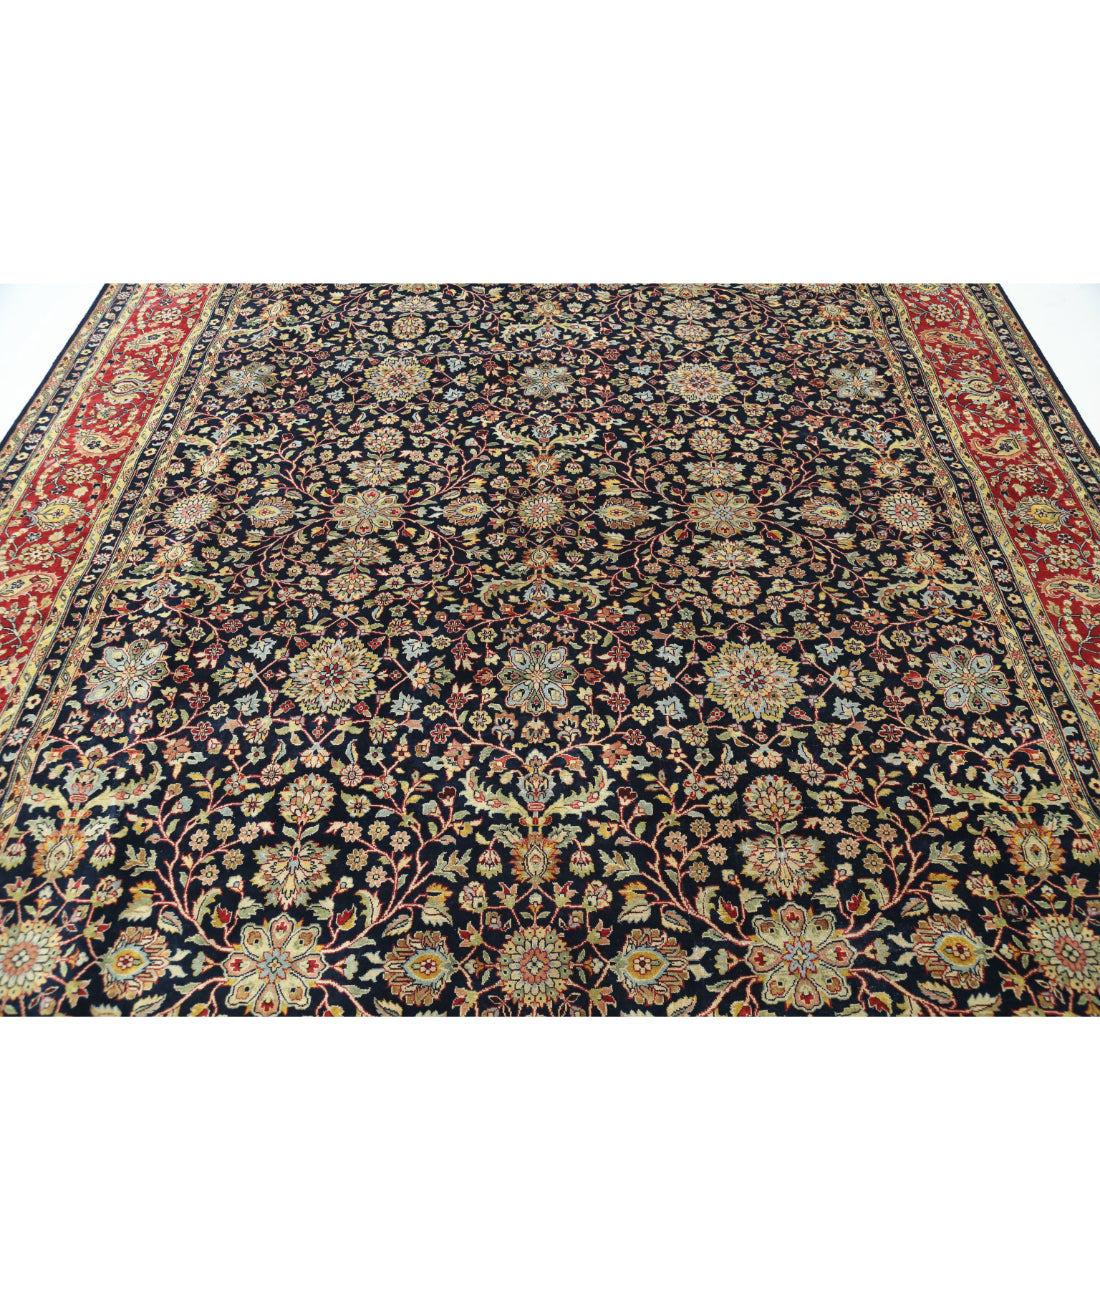 Heritage 8'9'' X 11'11'' Hand-Knotted Wool Rug 8'9'' x 11'11'' (273 X 368) / Blue / Red